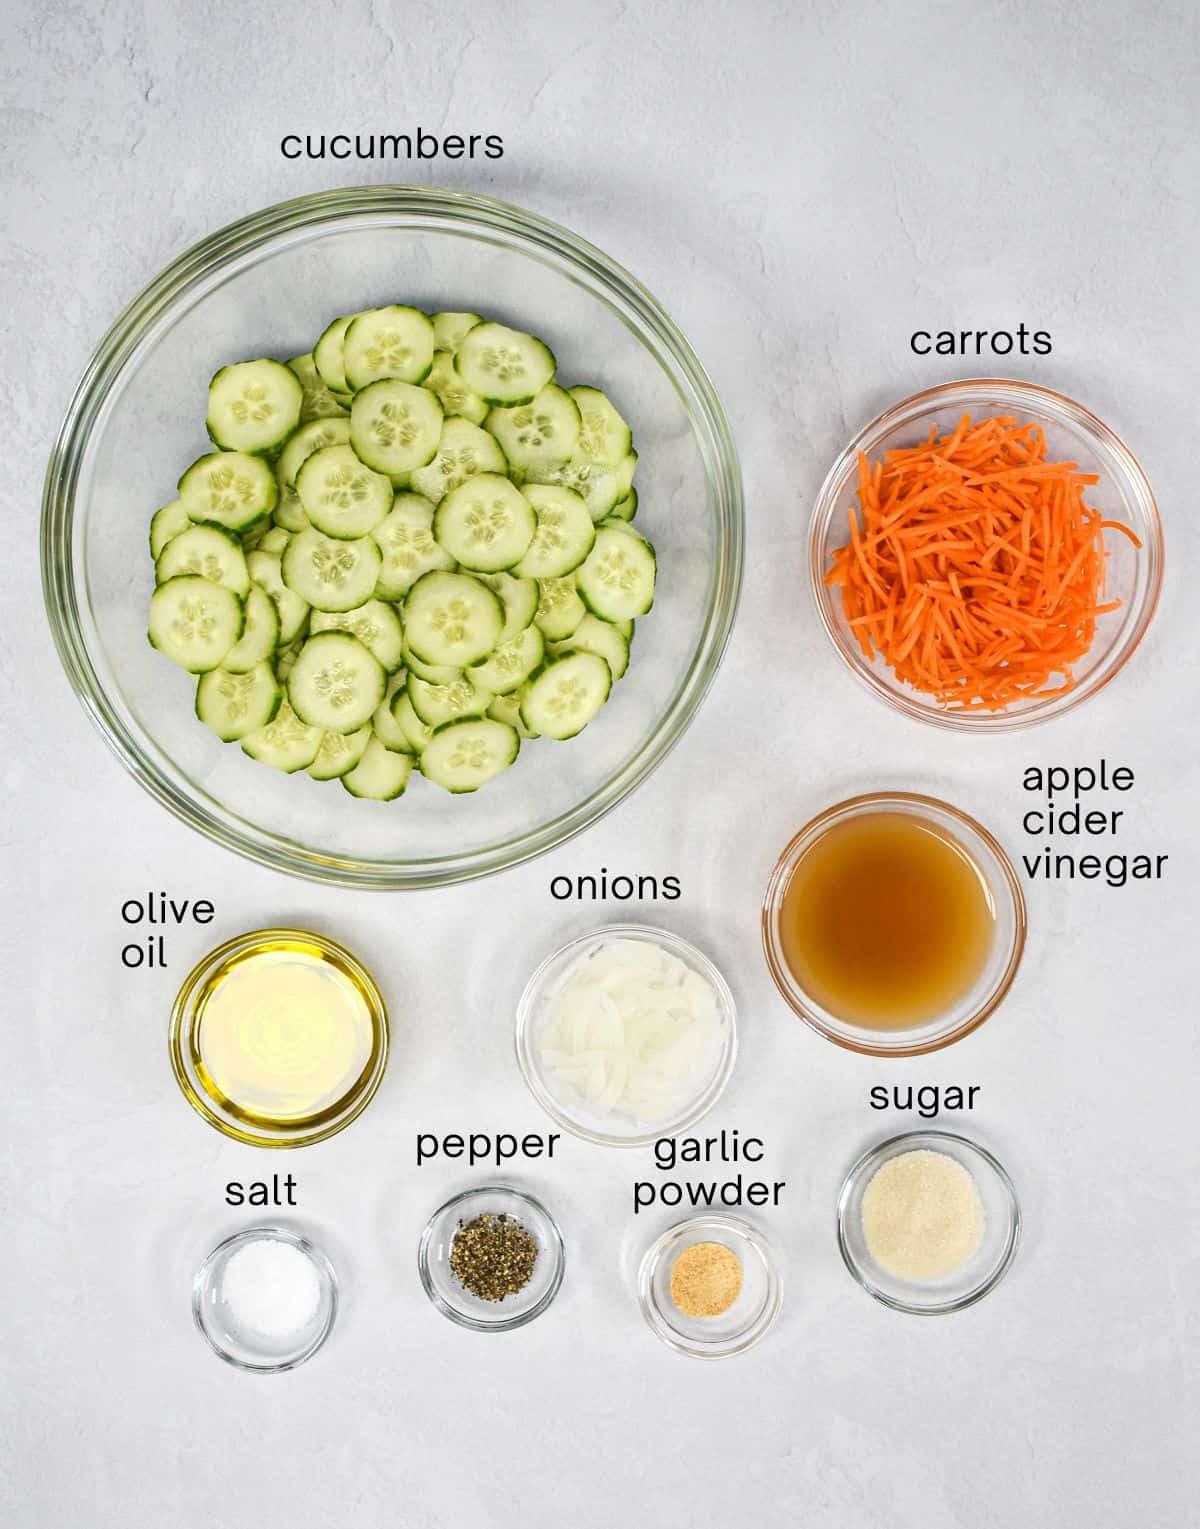 The ingredients for the side dish prepped and arranged in glass bowls on a white table, with each labeled in small, black letters.